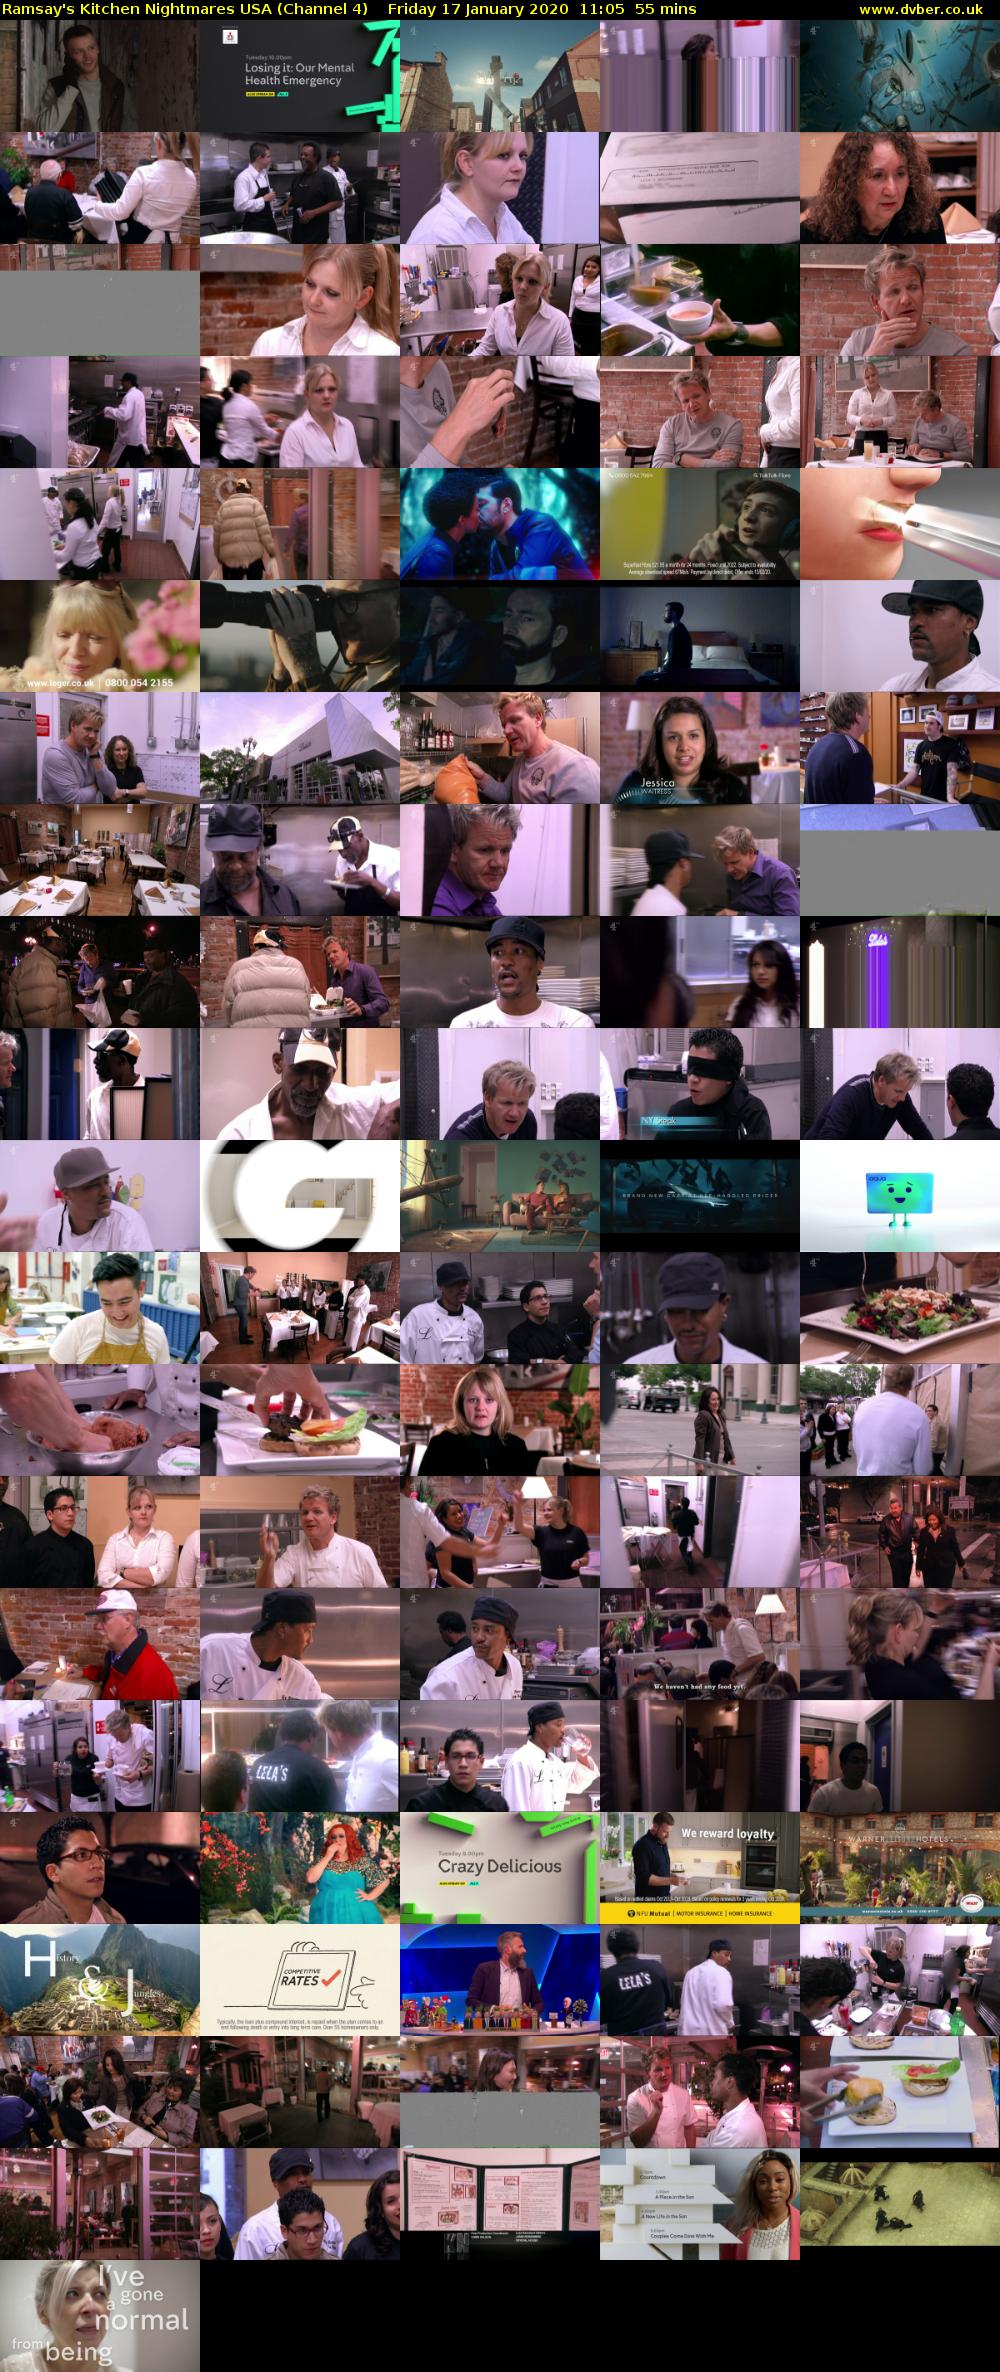 Ramsay's Kitchen Nightmares USA (Channel 4) Friday 17 January 2020 11:05 - 12:00